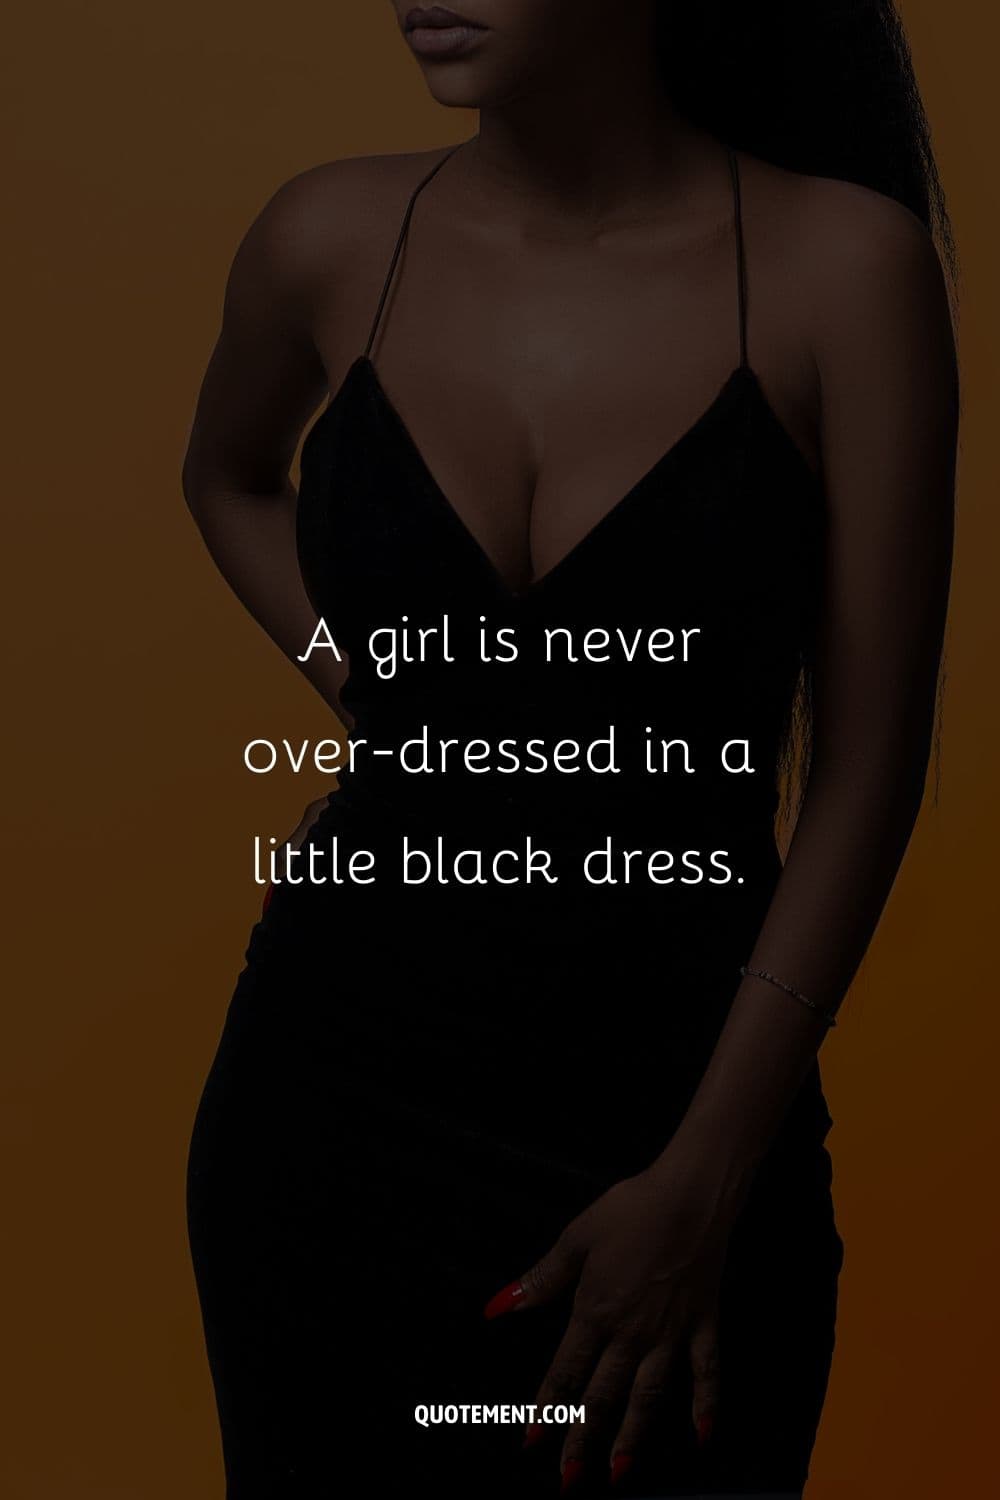 A girl is never over-dressed in a little black dress.